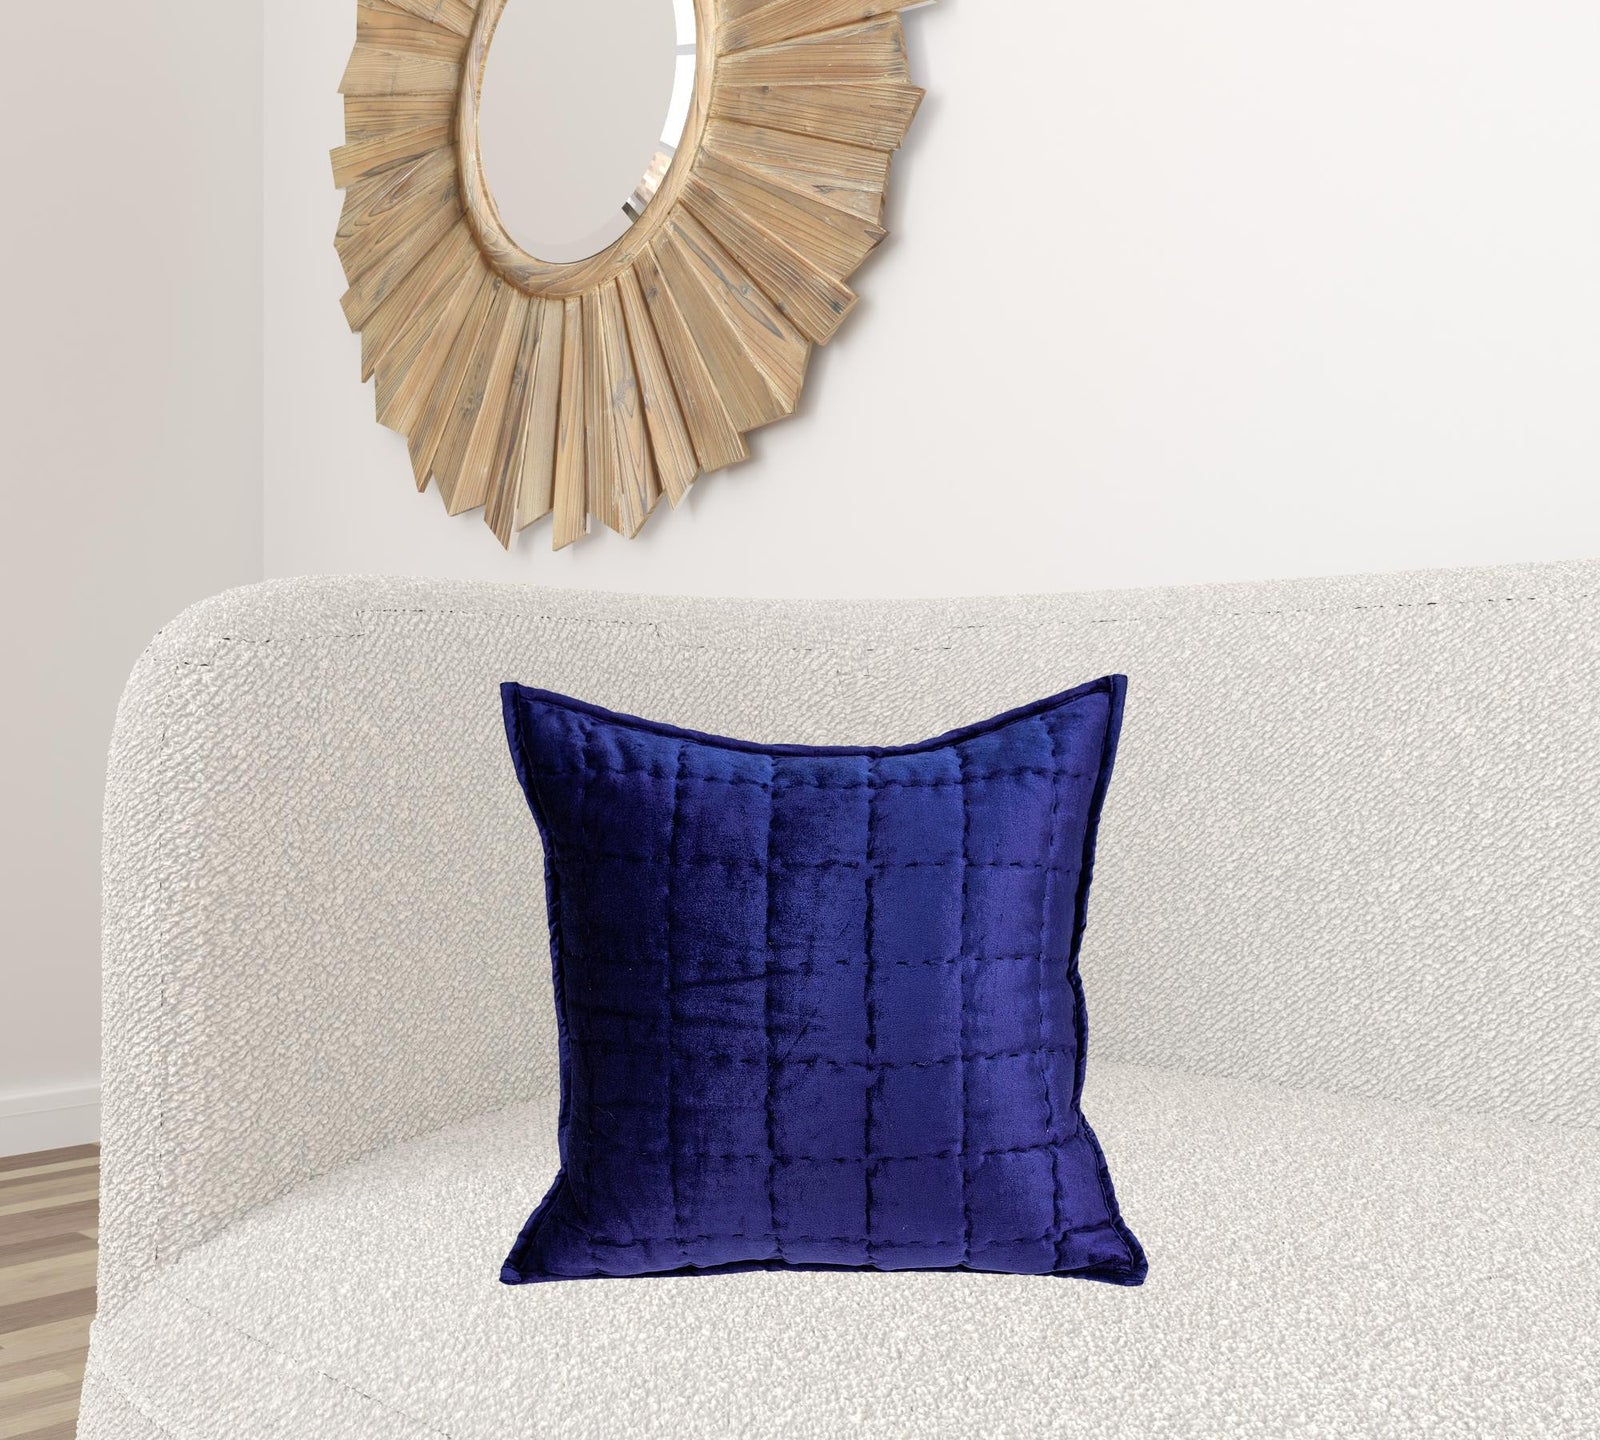 20" X 7" X 20" Transitional Royal Blue Quilted Pillow Cover With Poly Insert